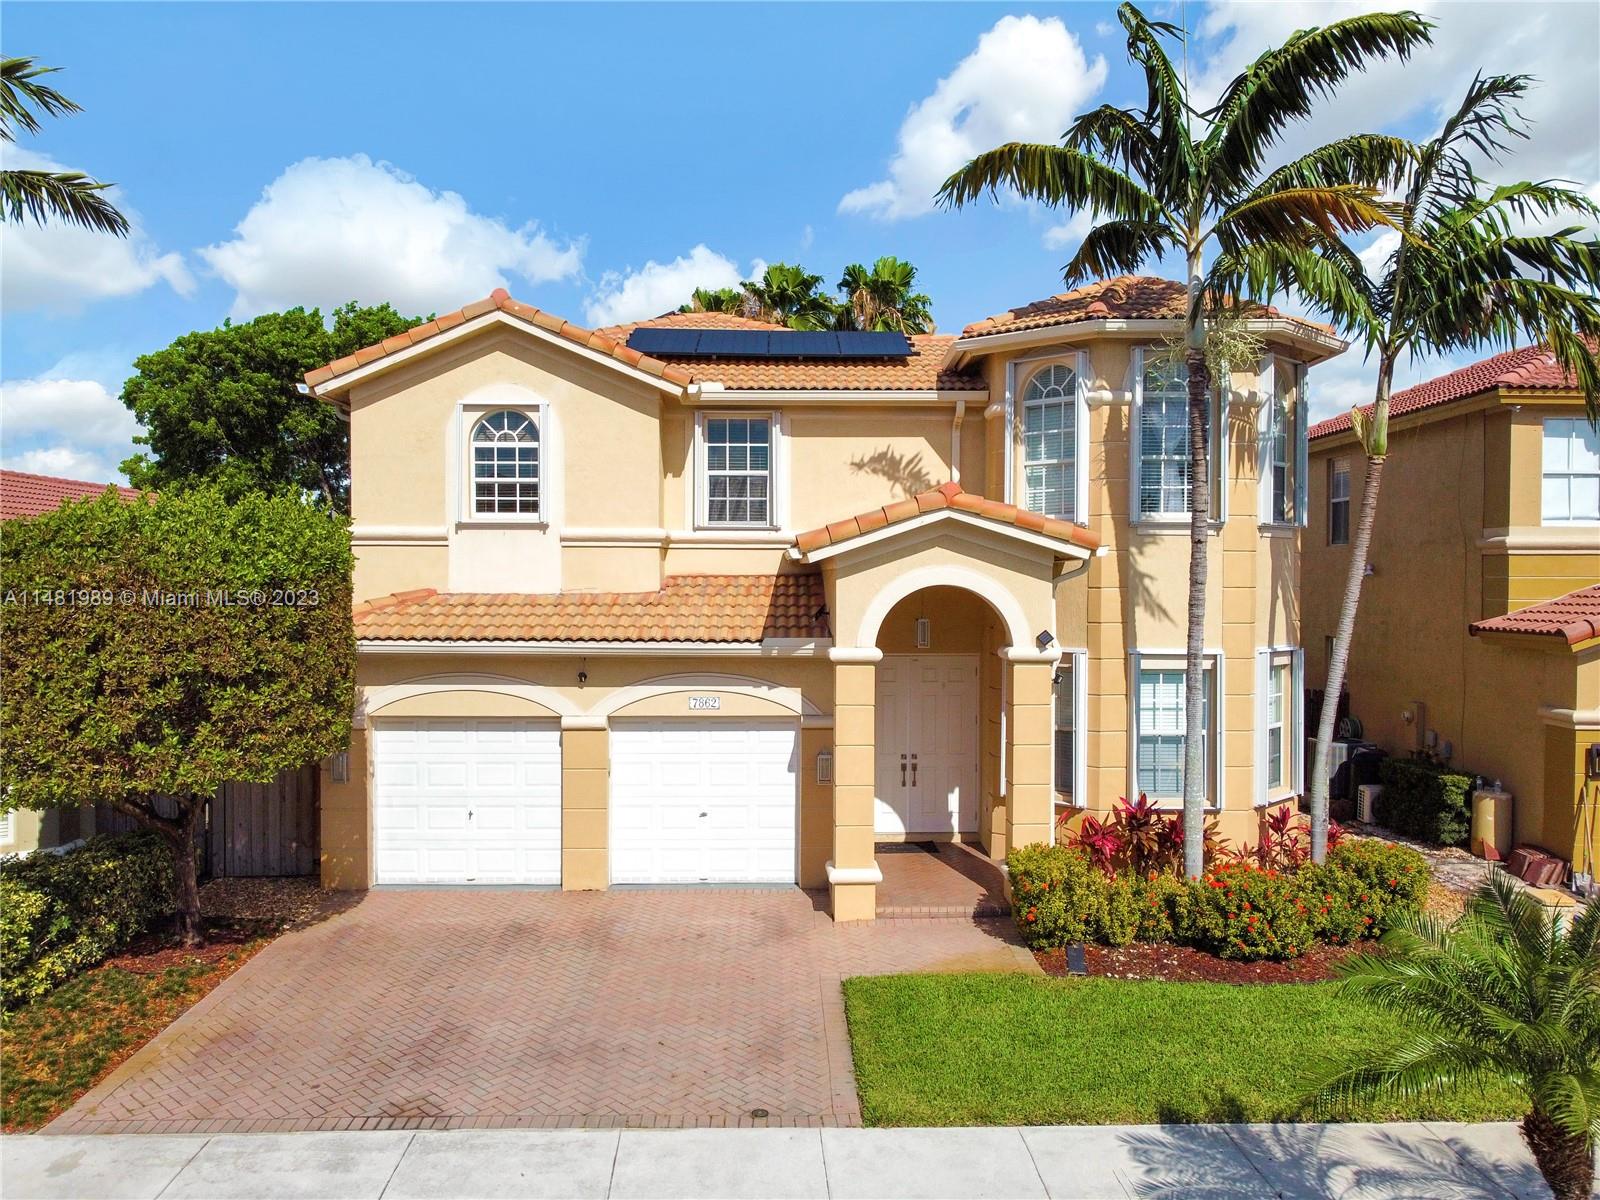 7862 NW 113th Pl, Doral, Florida 33178, 5 Bedrooms Bedrooms, ,4 BathroomsBathrooms,Residential,For Sale,7862 NW 113th Pl,A11481989